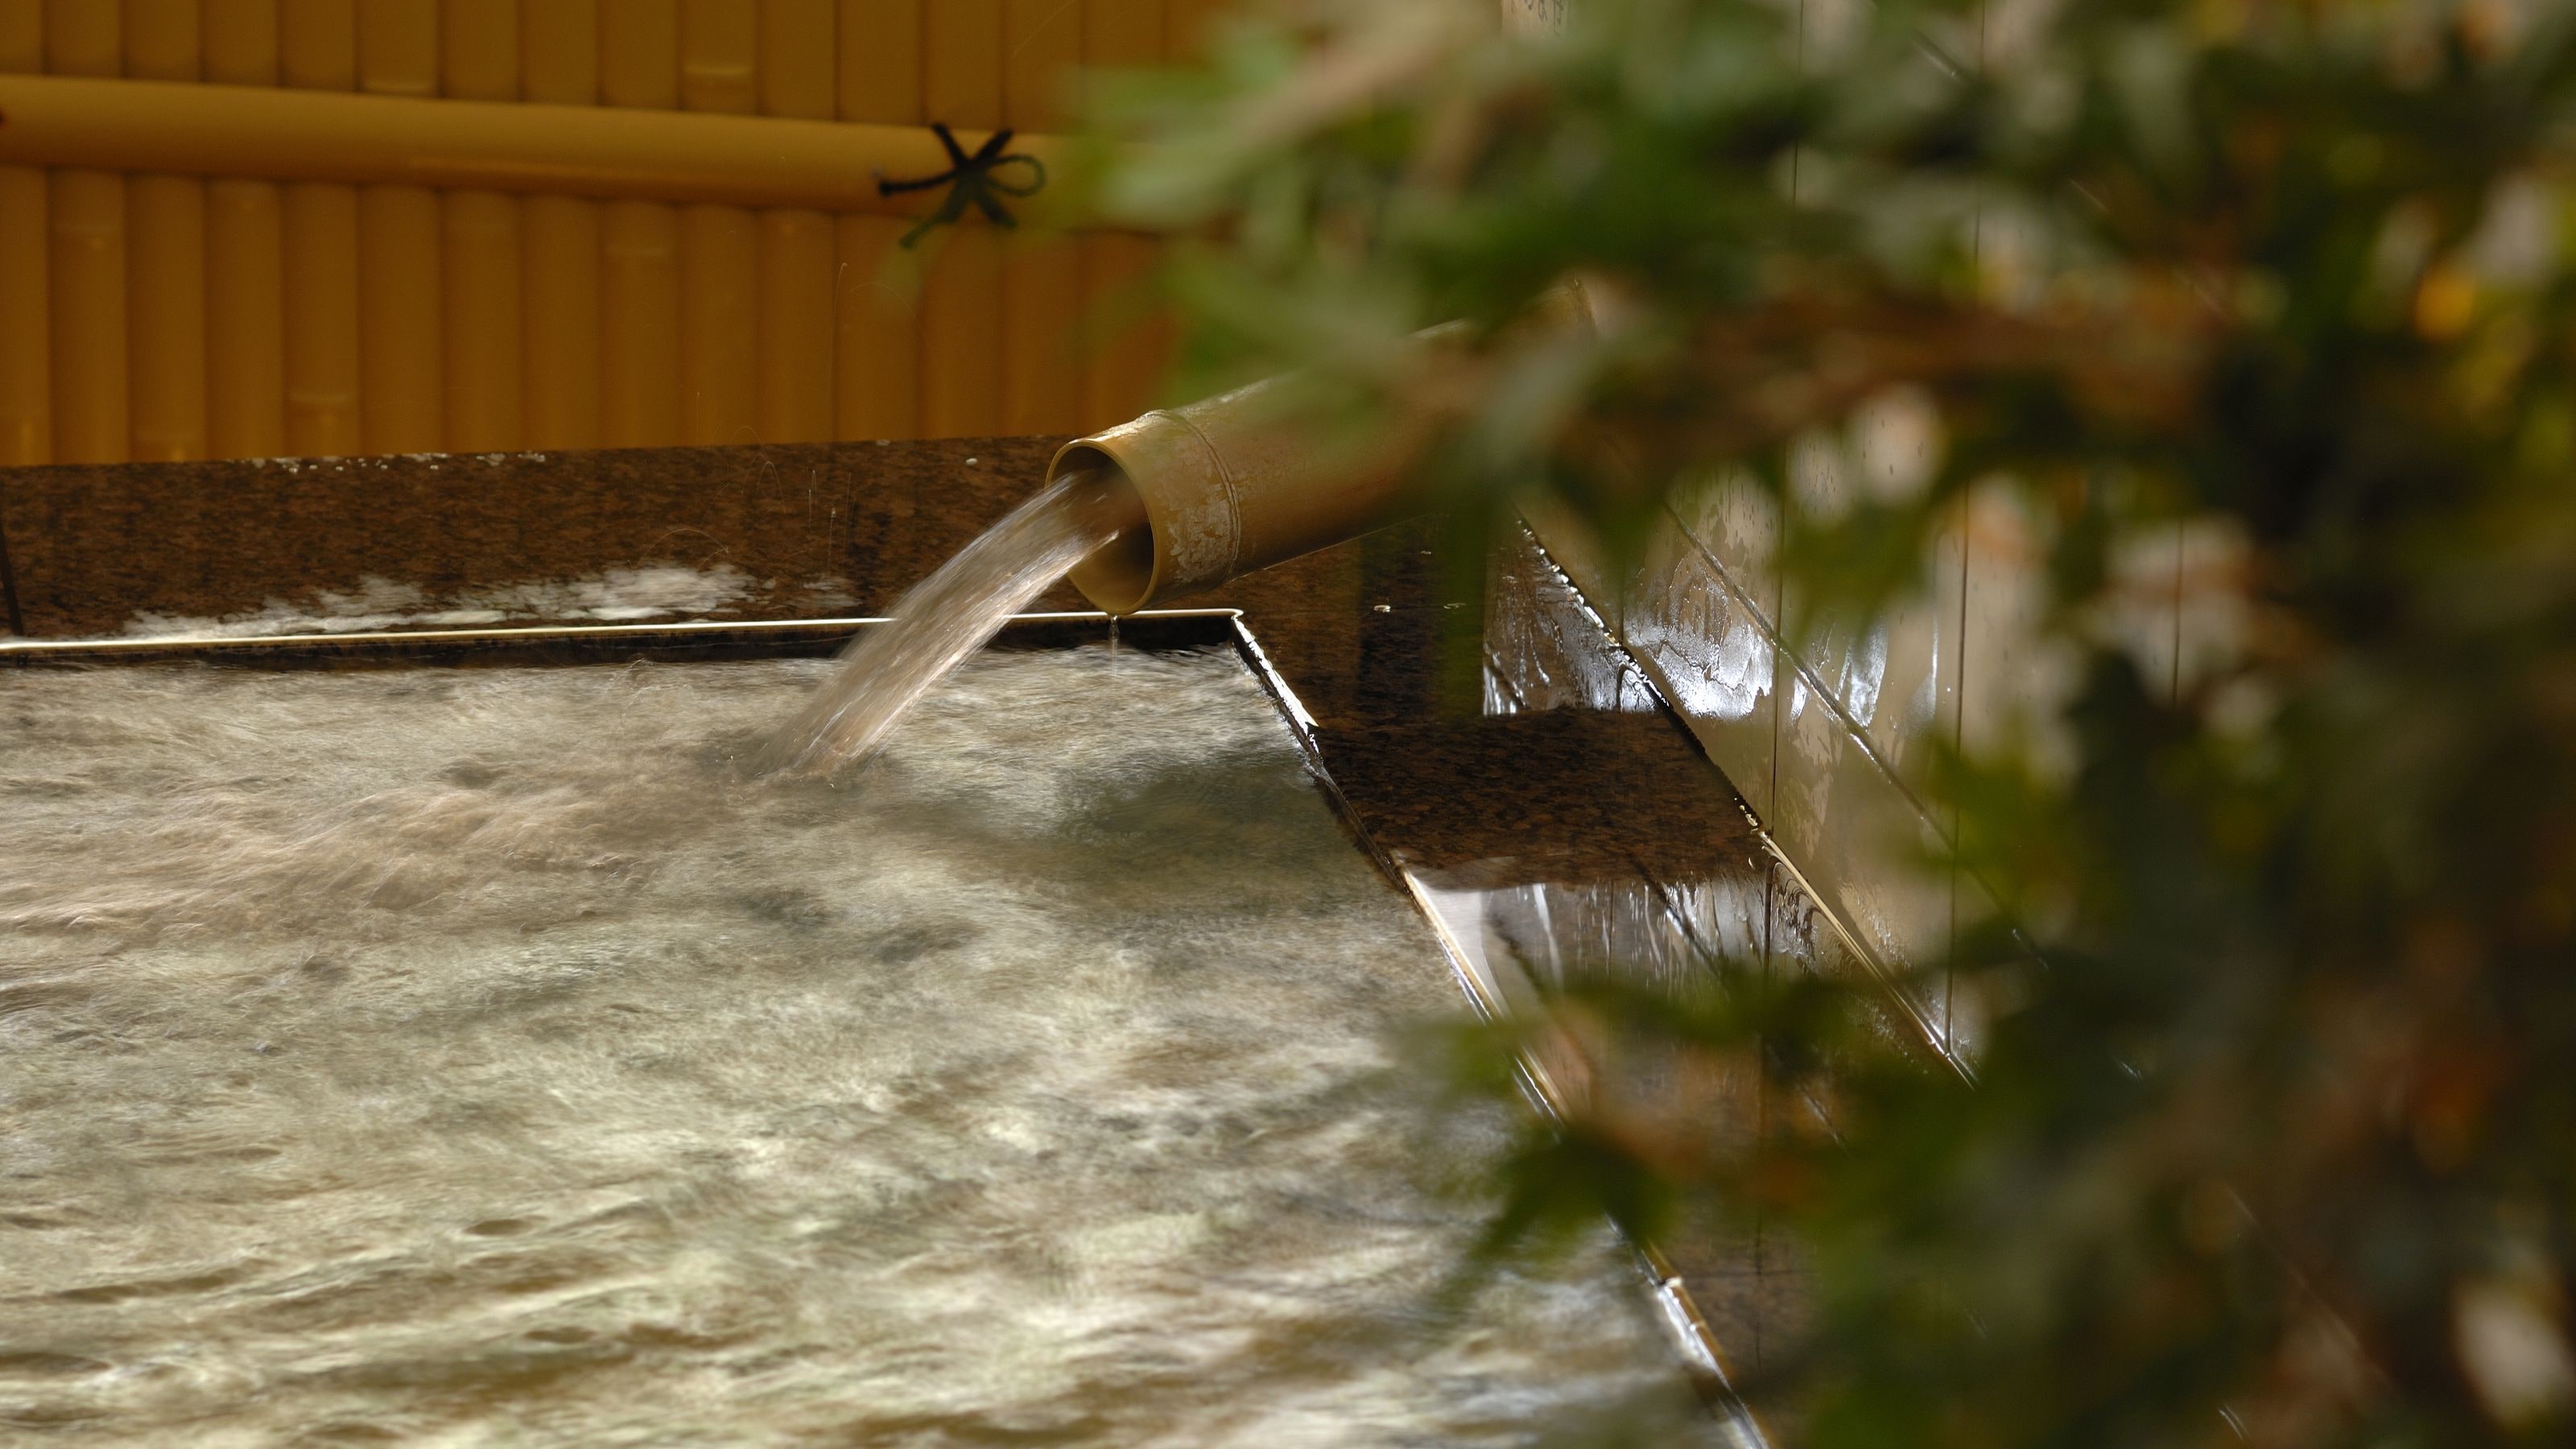 ◆ Dogo Onsen A large communal bath that boasts hot water. It is a spacious structure.